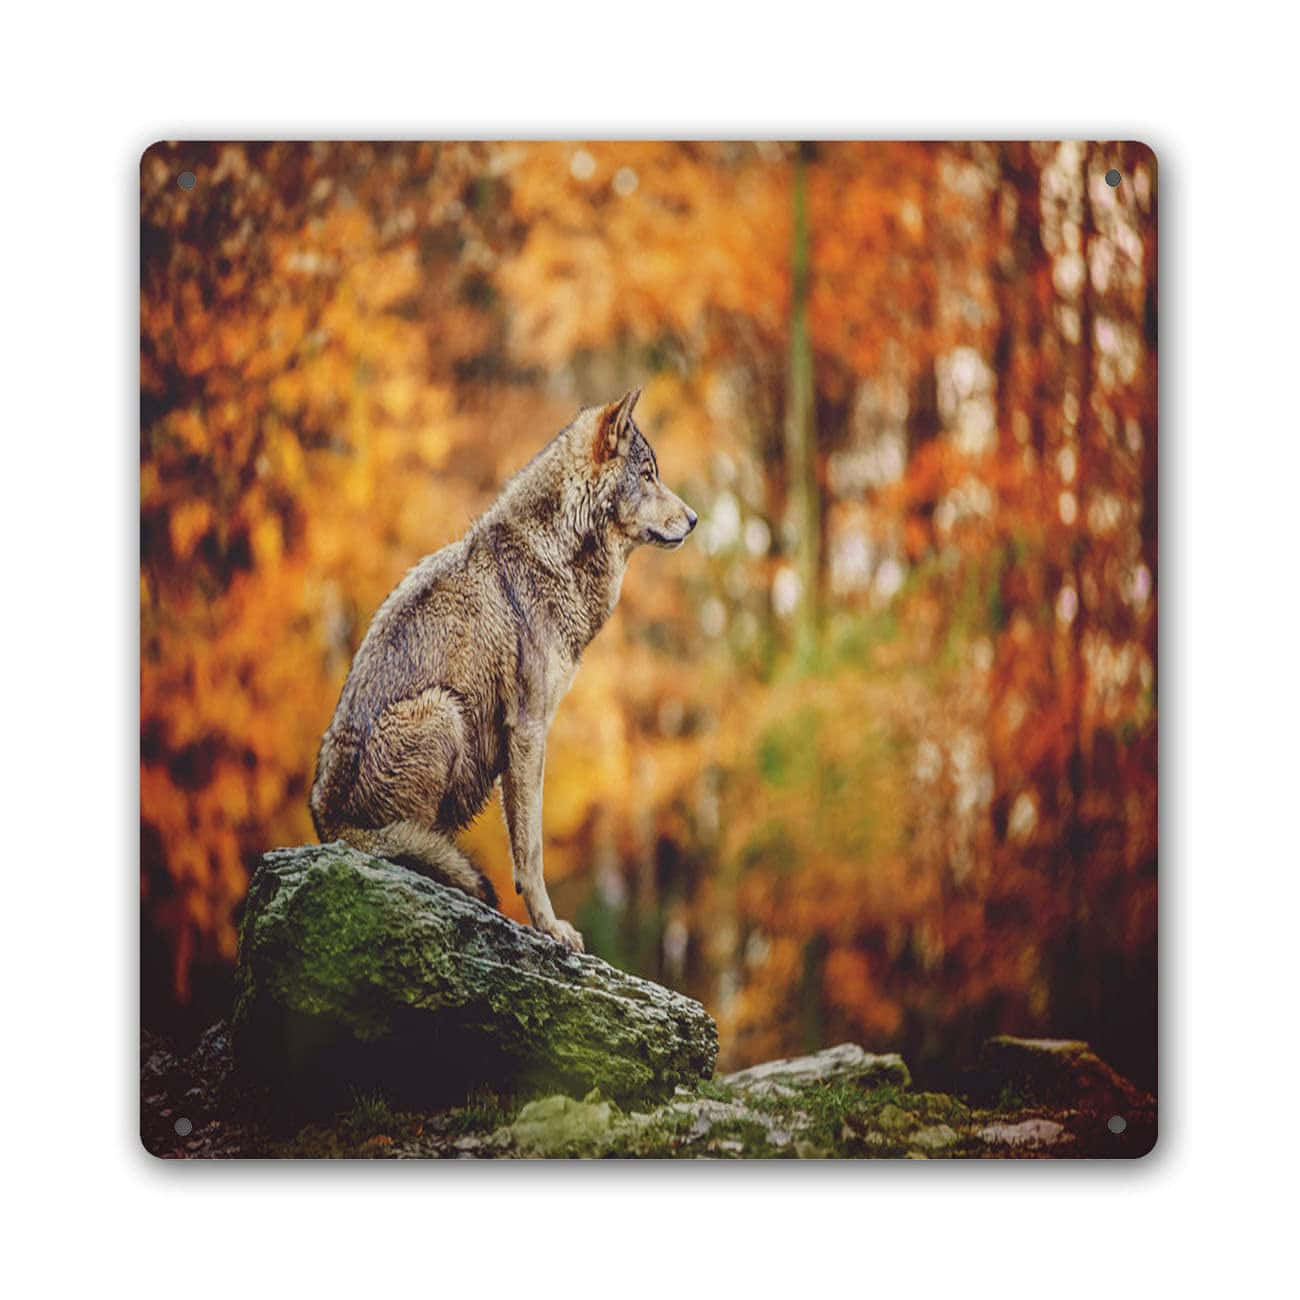 Majestic wolf in a vibrant autumn forest Wallpaper